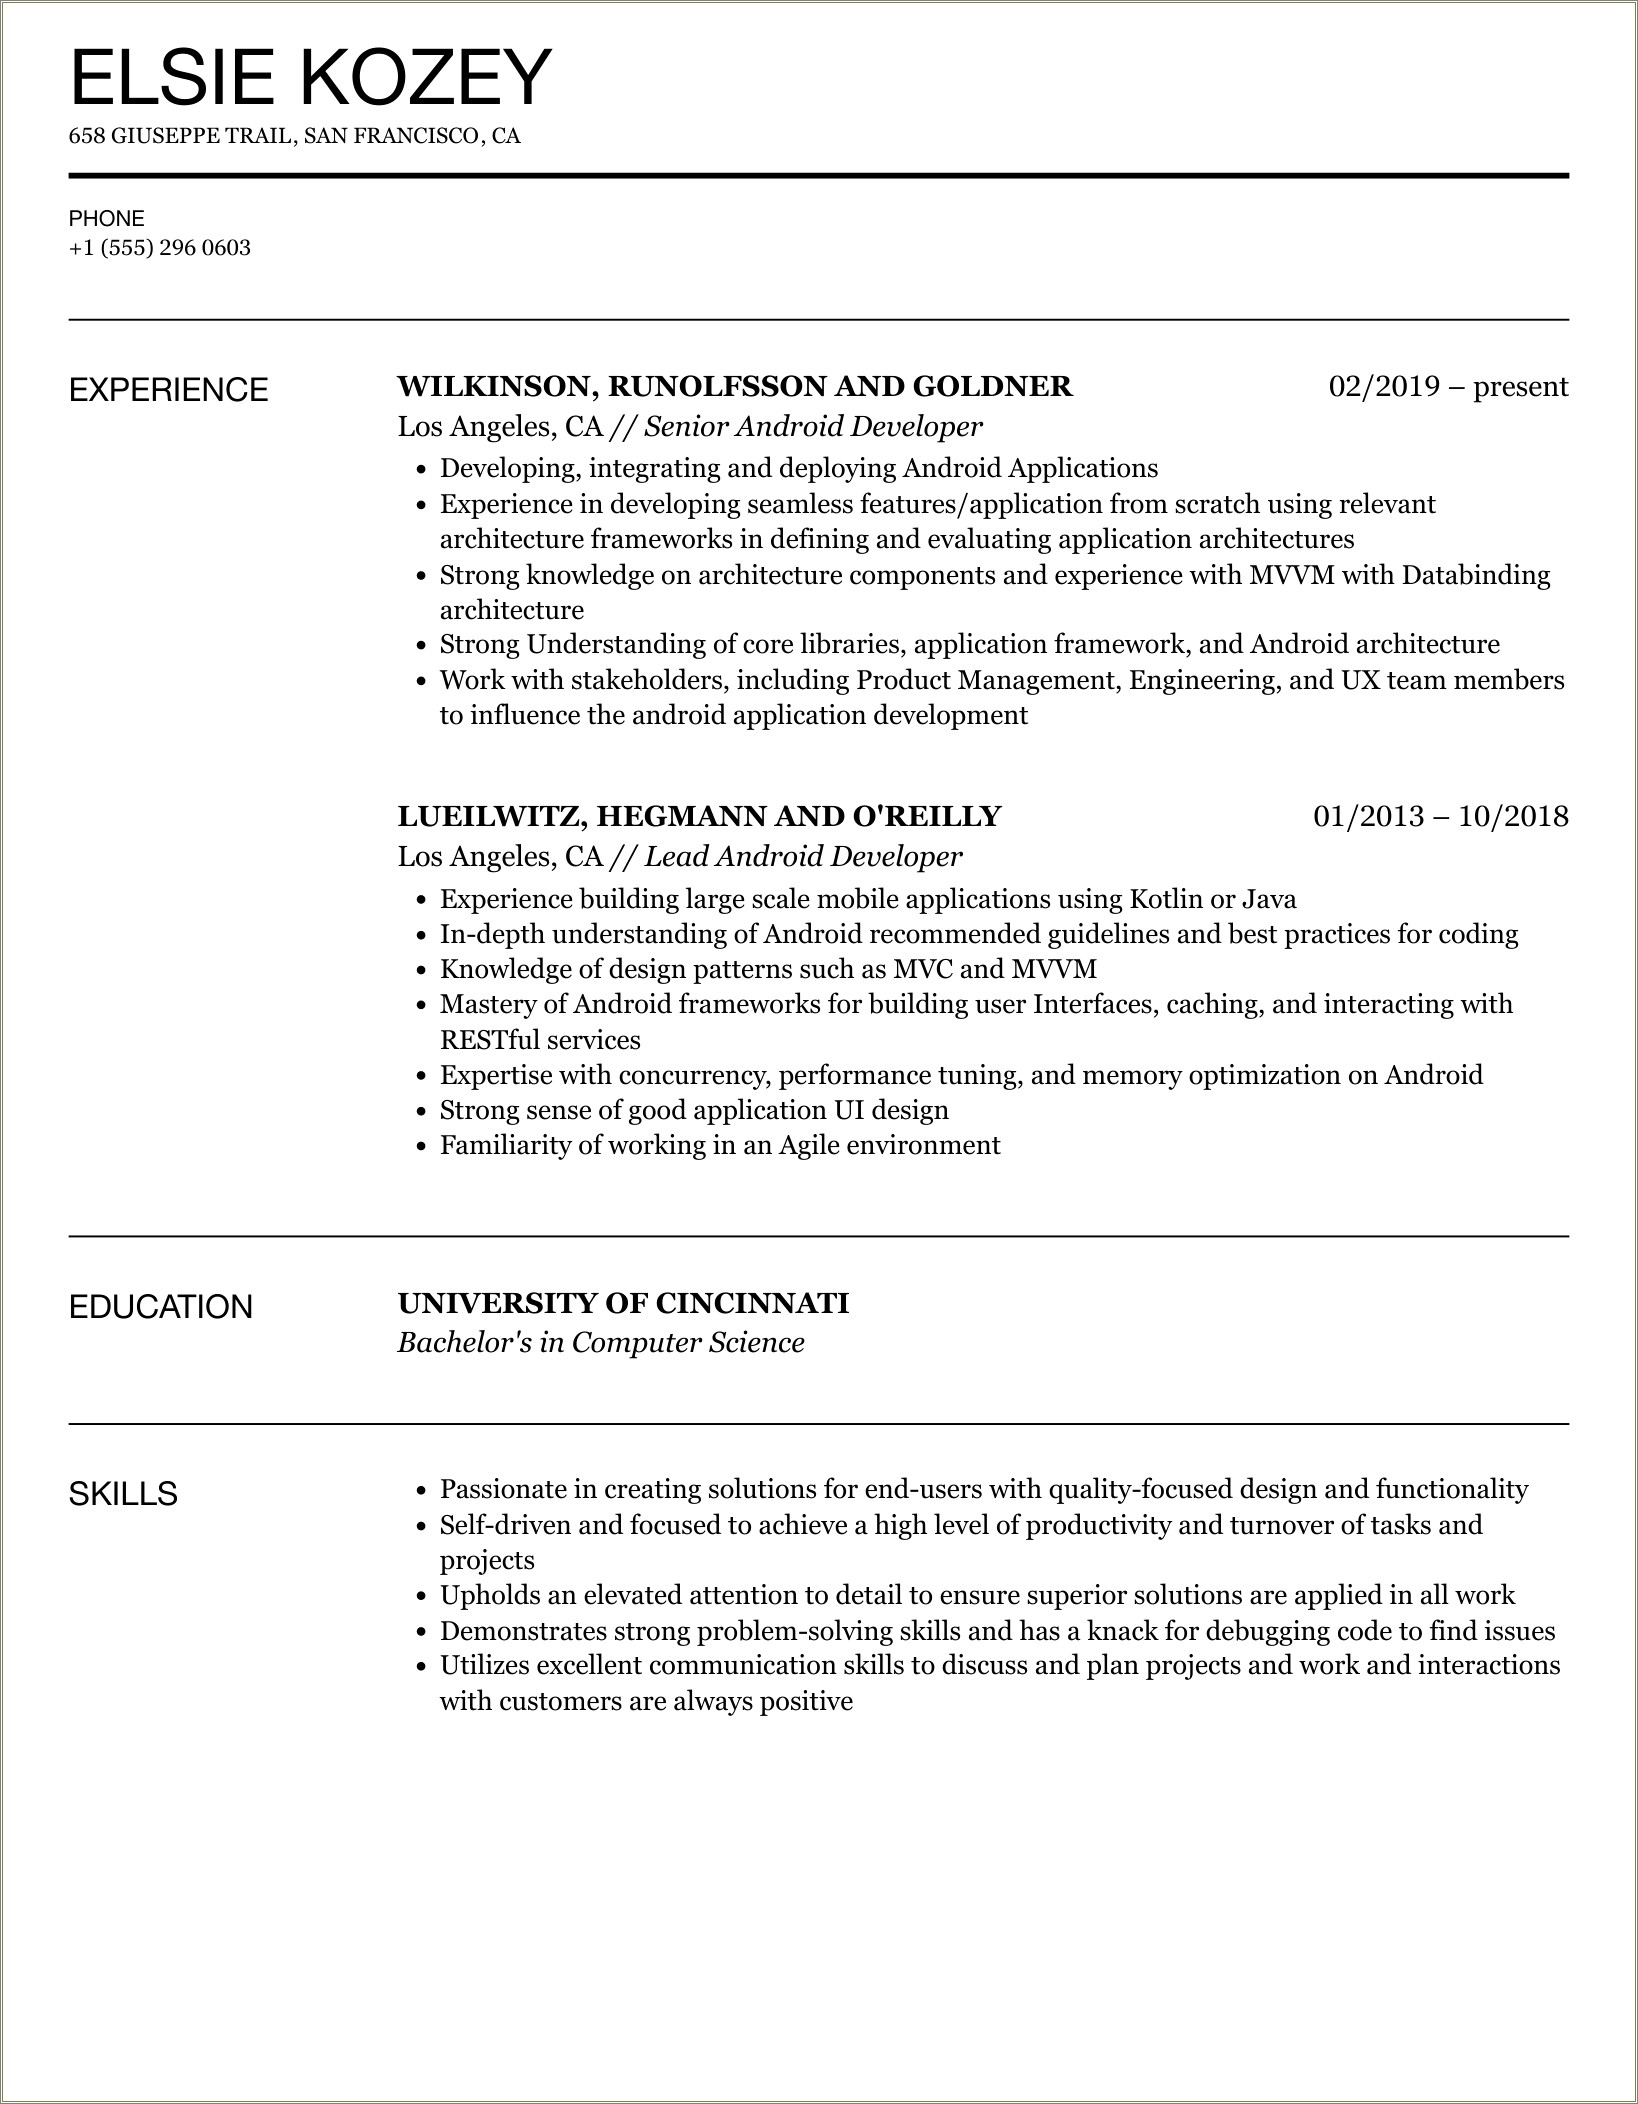 6 Month Experience Resume For Android Developer